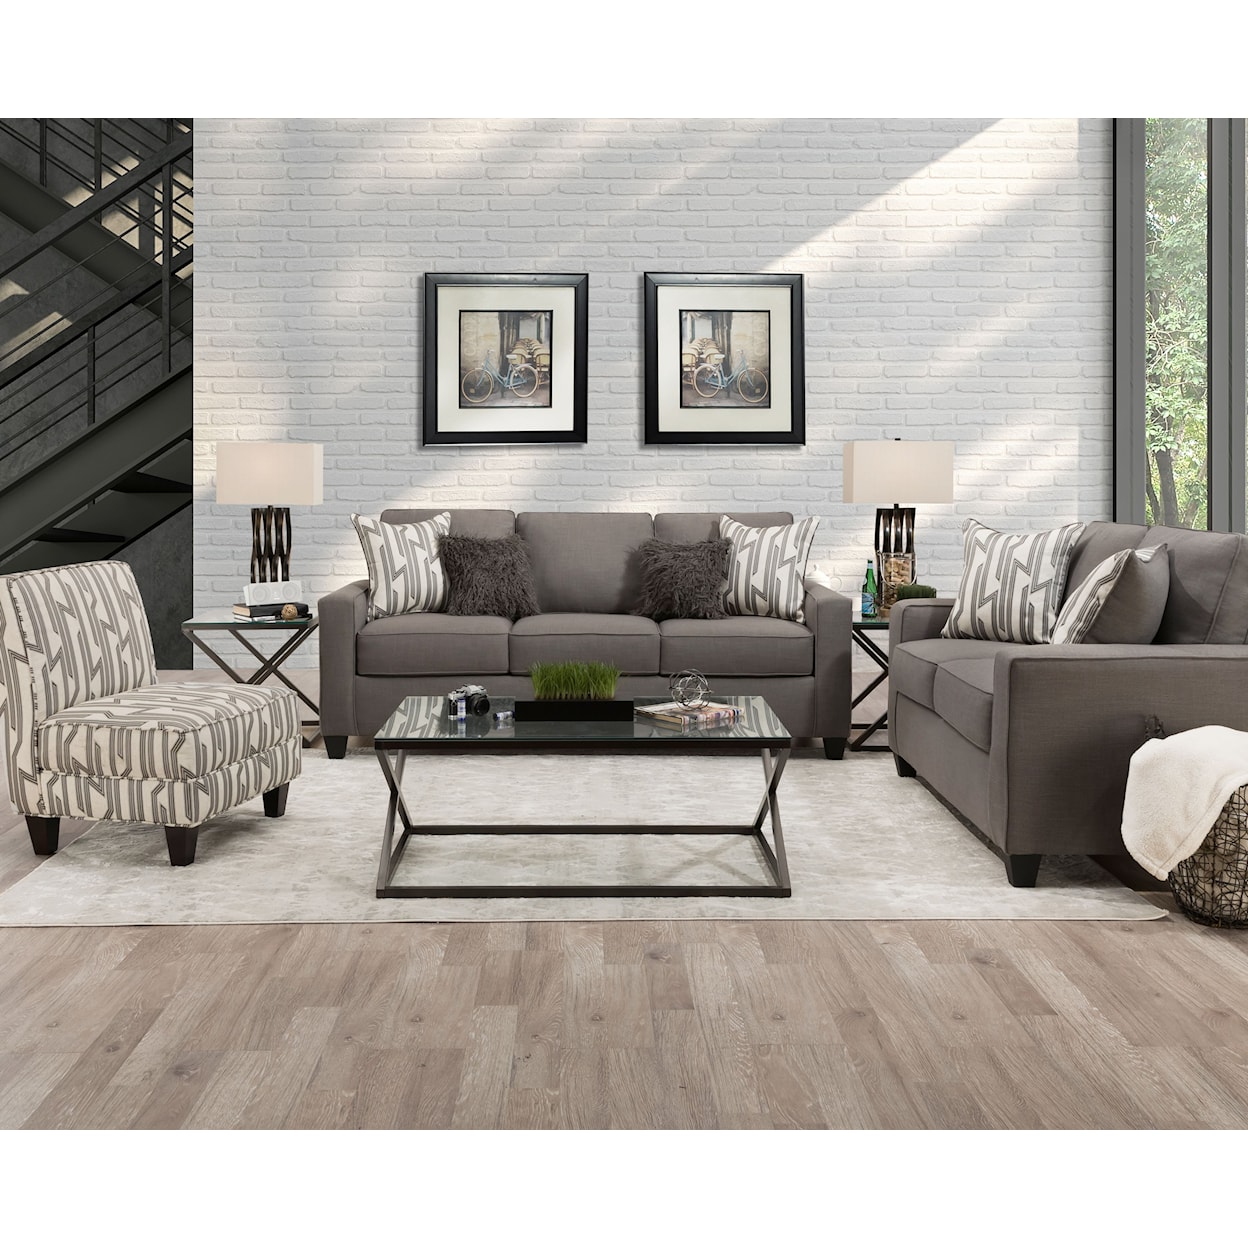 Behold Home 7205 Lynx 3-Piece Living Room Set